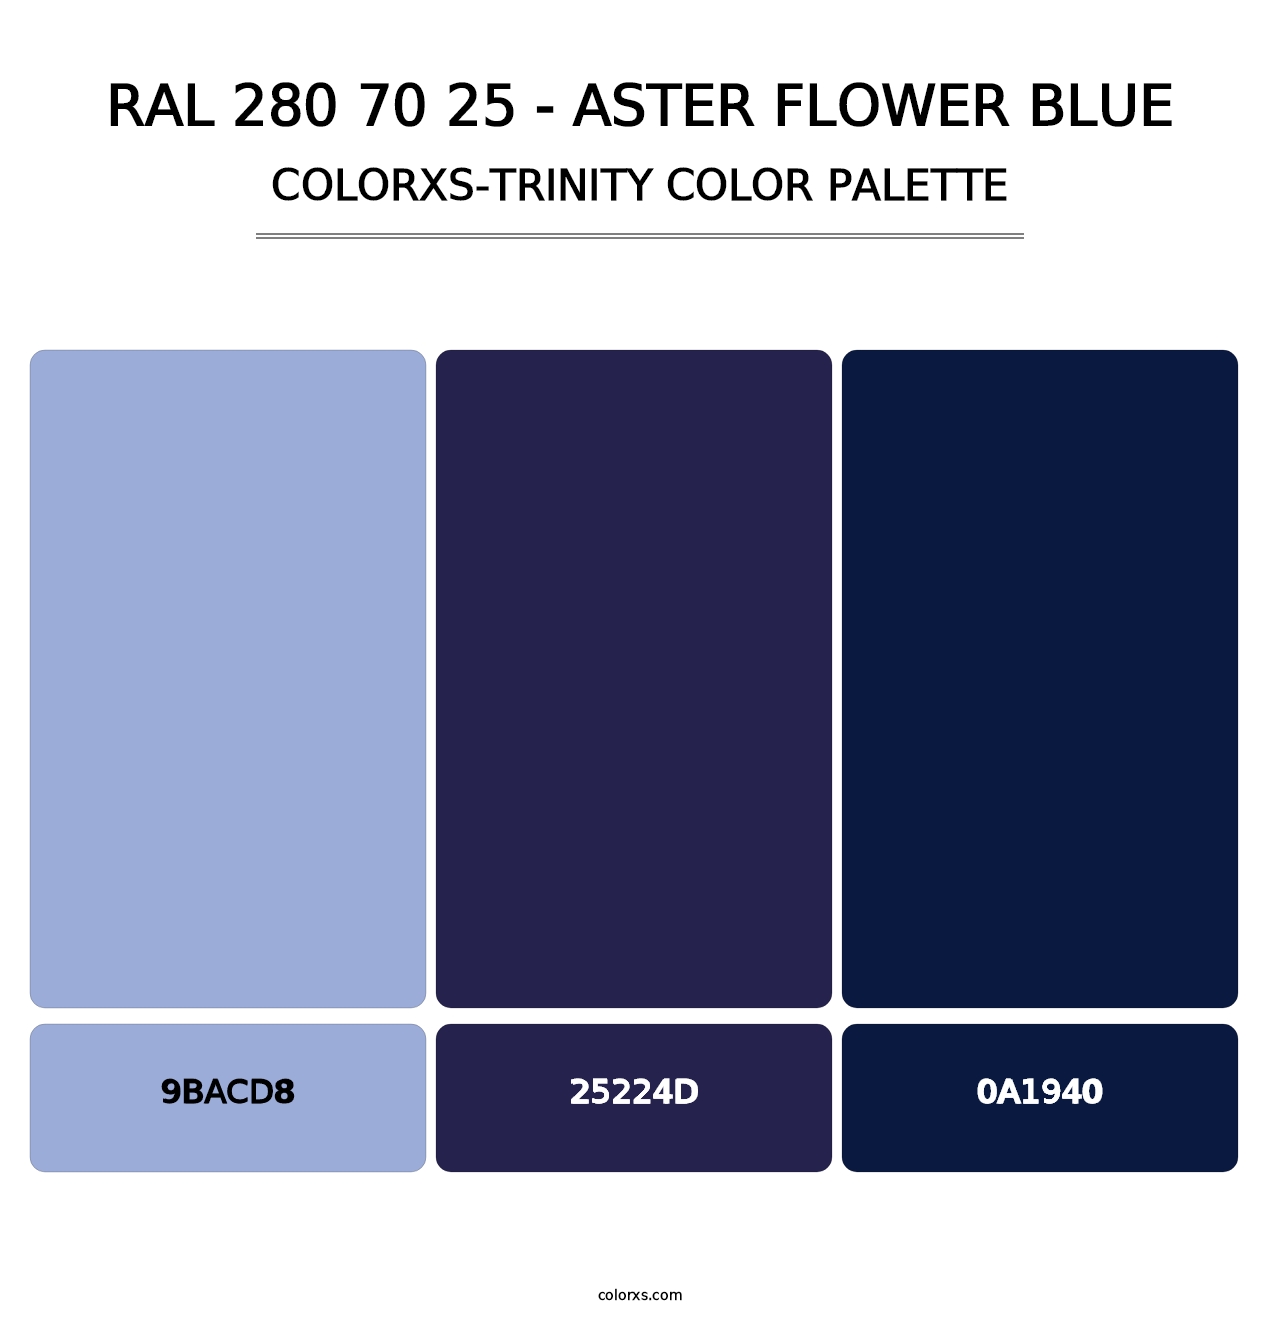 RAL 280 70 25 - Aster Flower Blue - Colorxs Trinity Palette